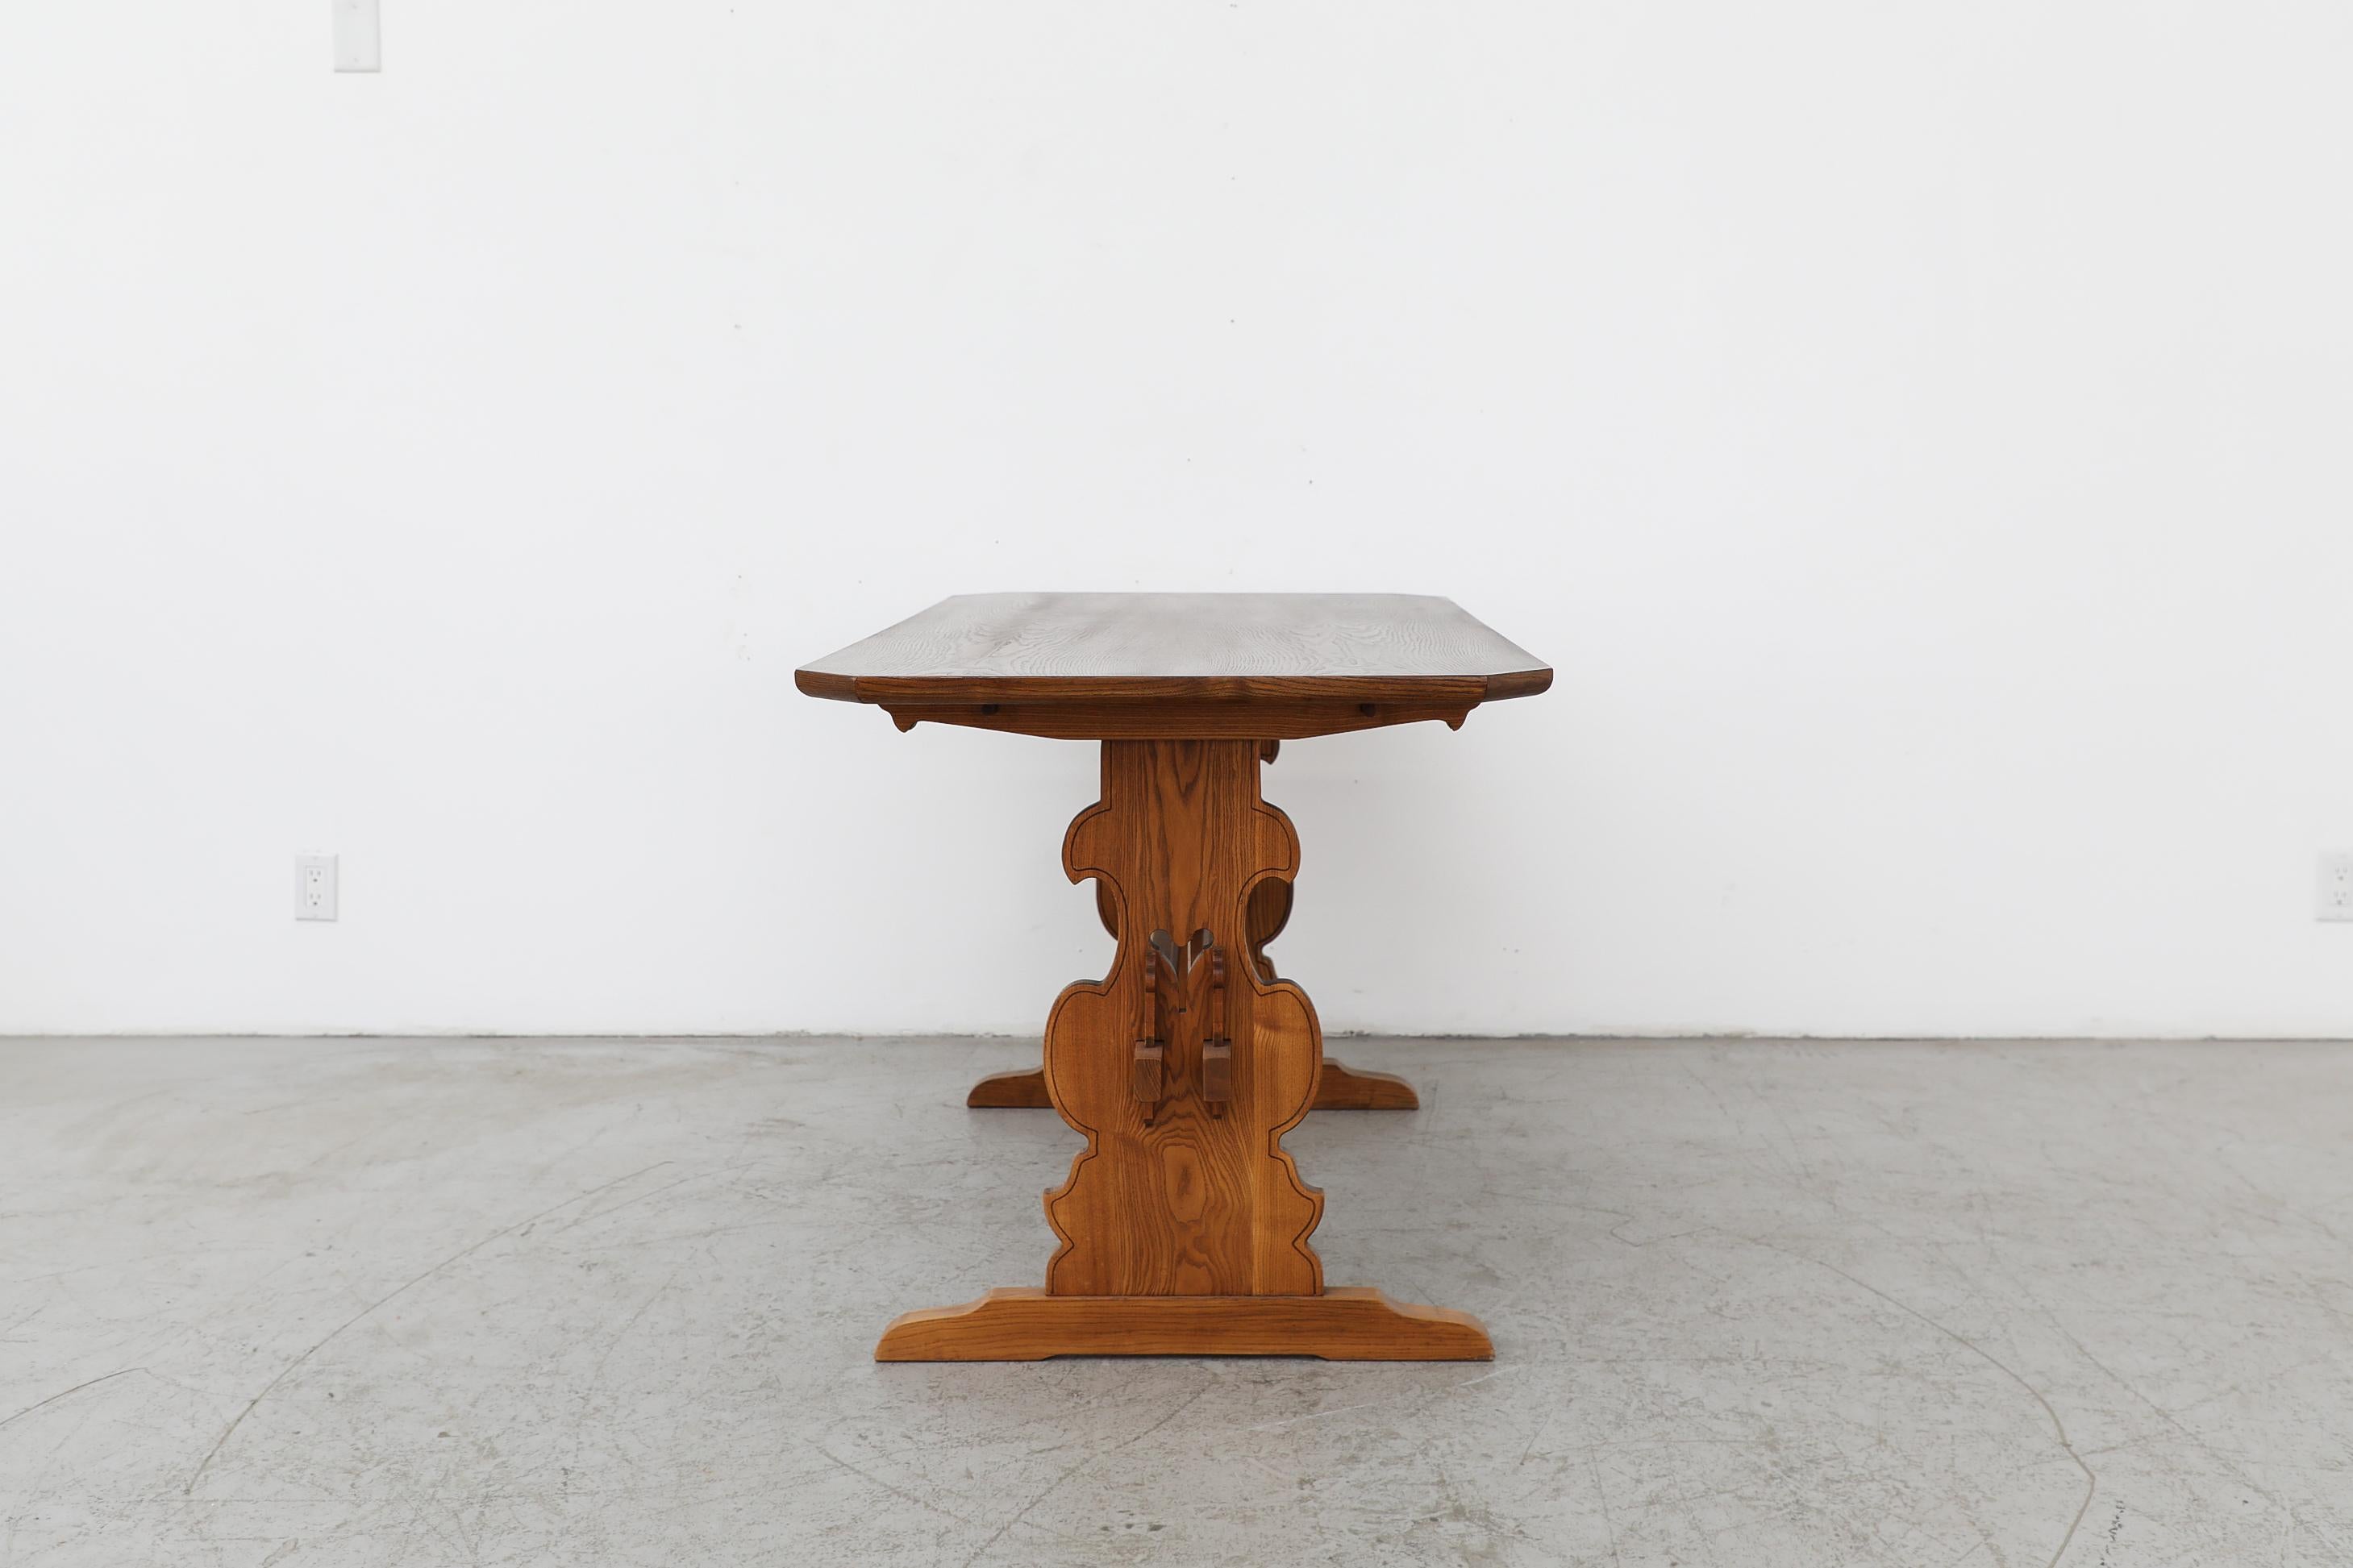 Austrian Ornate Brutalist Tyrolean Style Dark Pine Table with Angled Corners In Good Condition For Sale In Los Angeles, CA